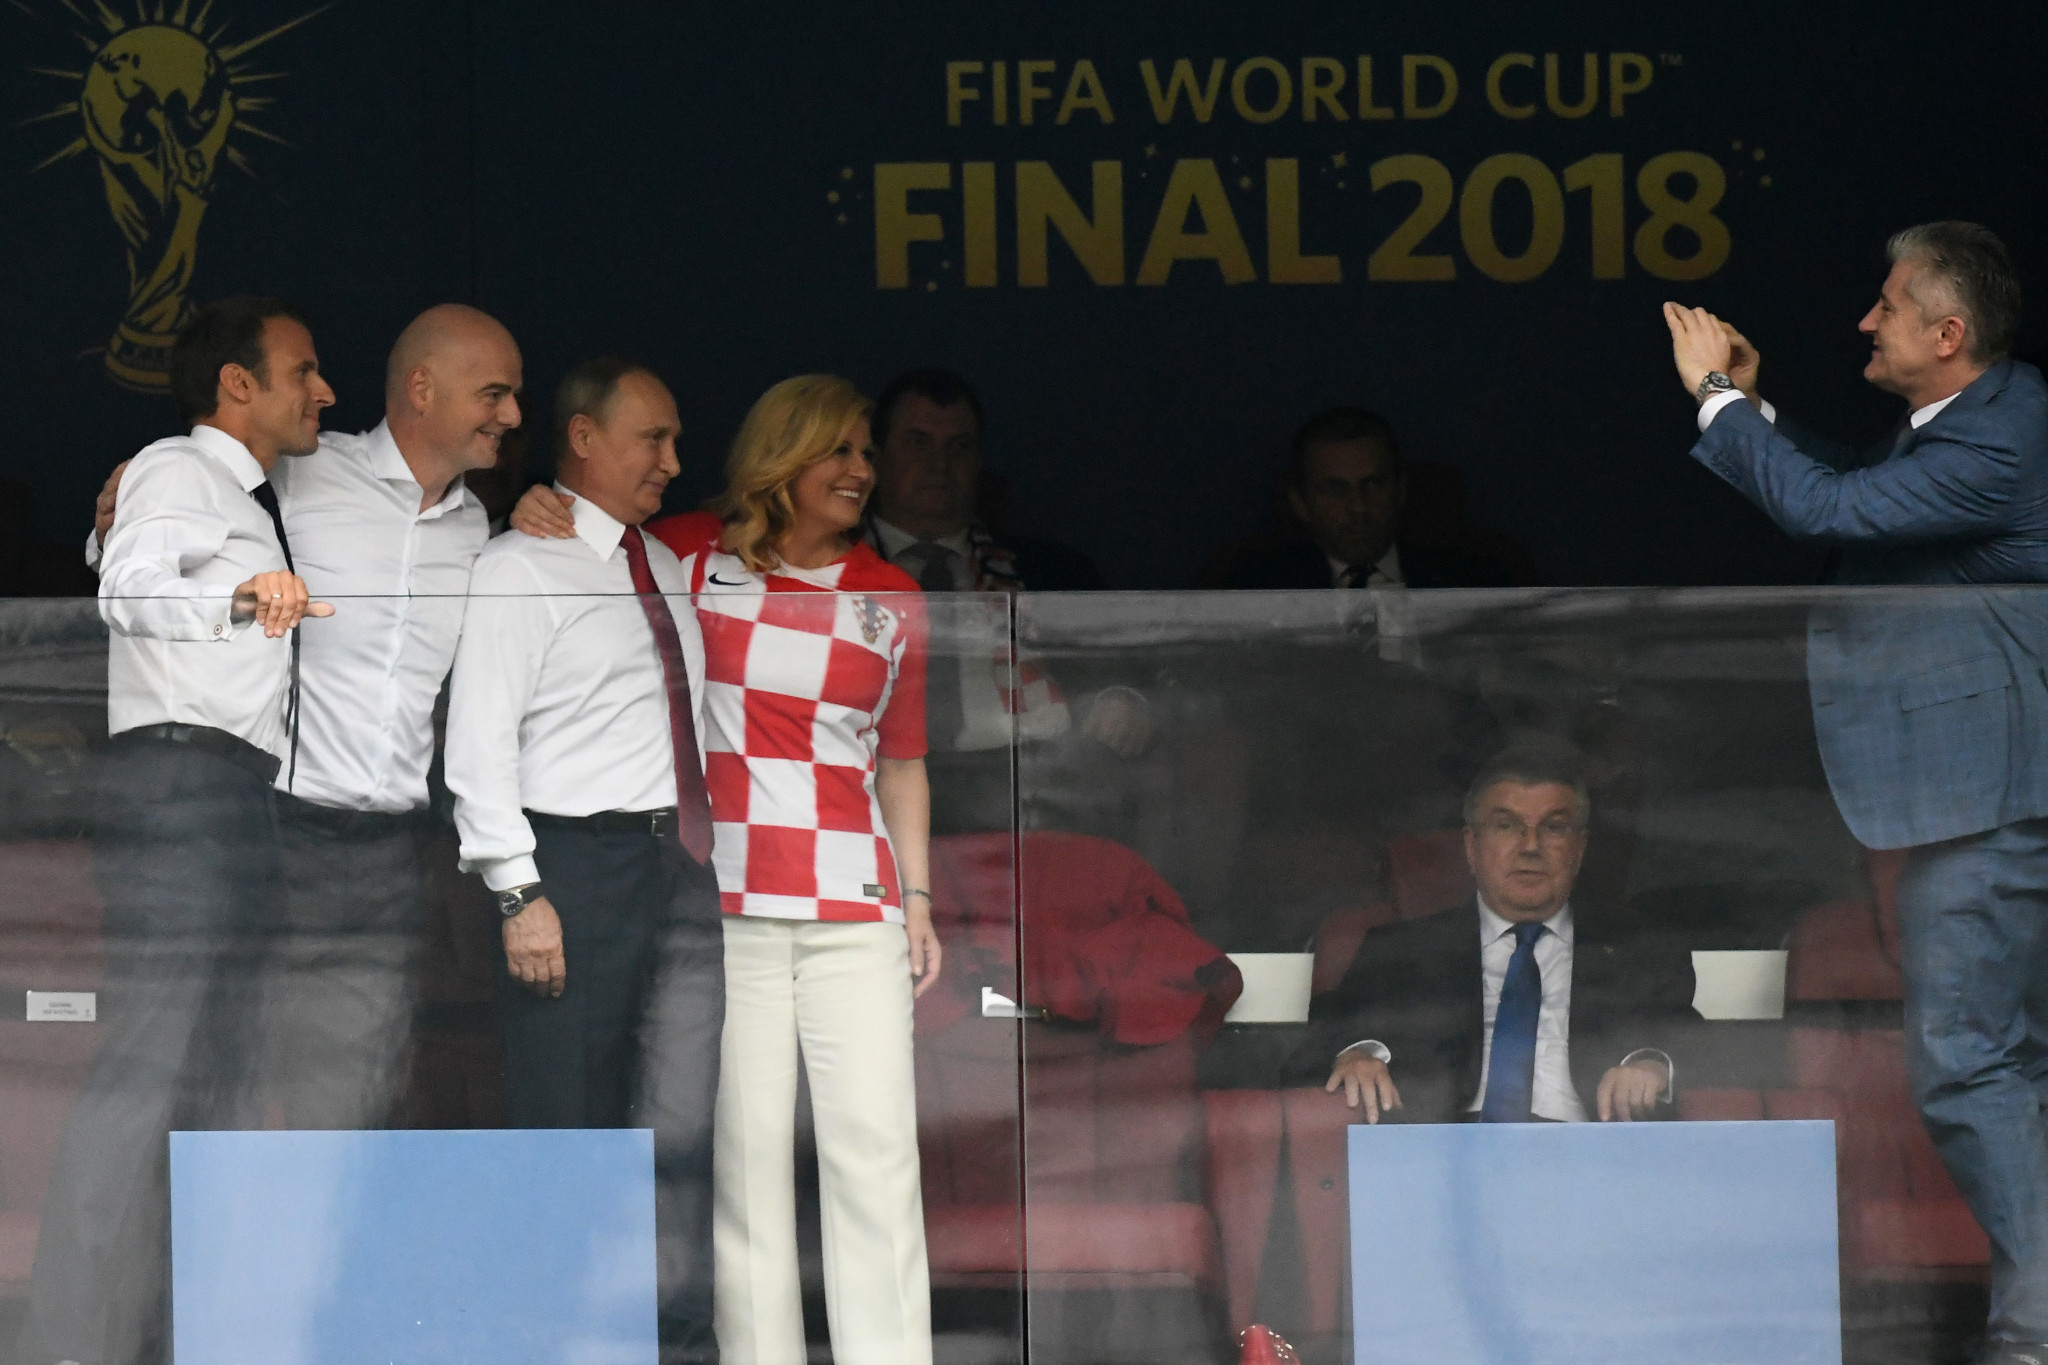 Gianni Infantino has been mixing with the world's leaders during the FIFA World Cup in Russia ©Getty Images